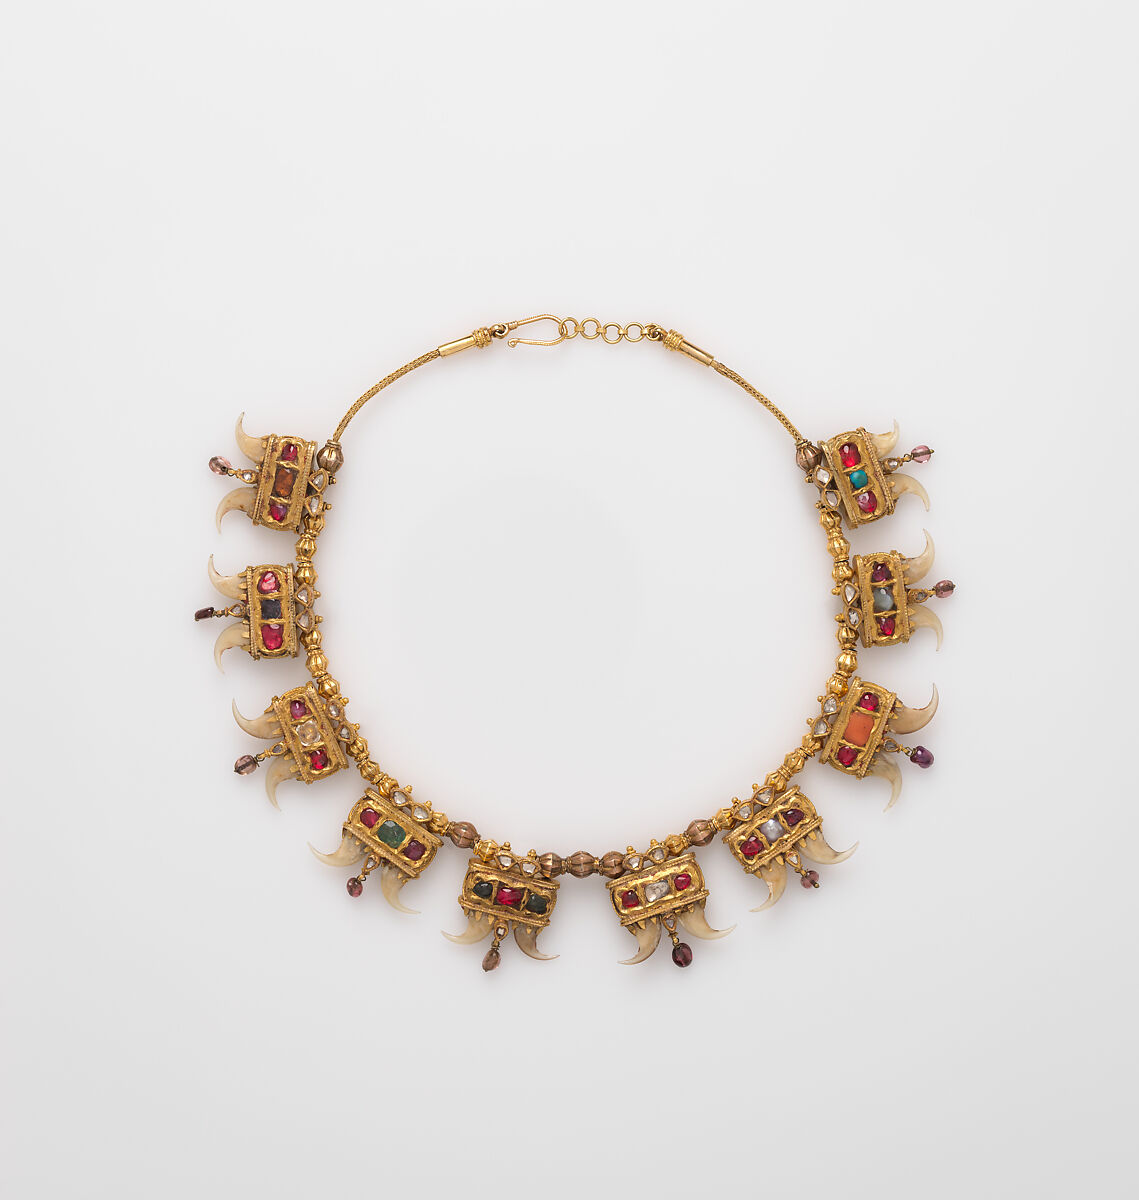 Tiger-Claw necklace, Gold, gold beads, rubies, emeralds, diamonds, spinels and tiger claws 